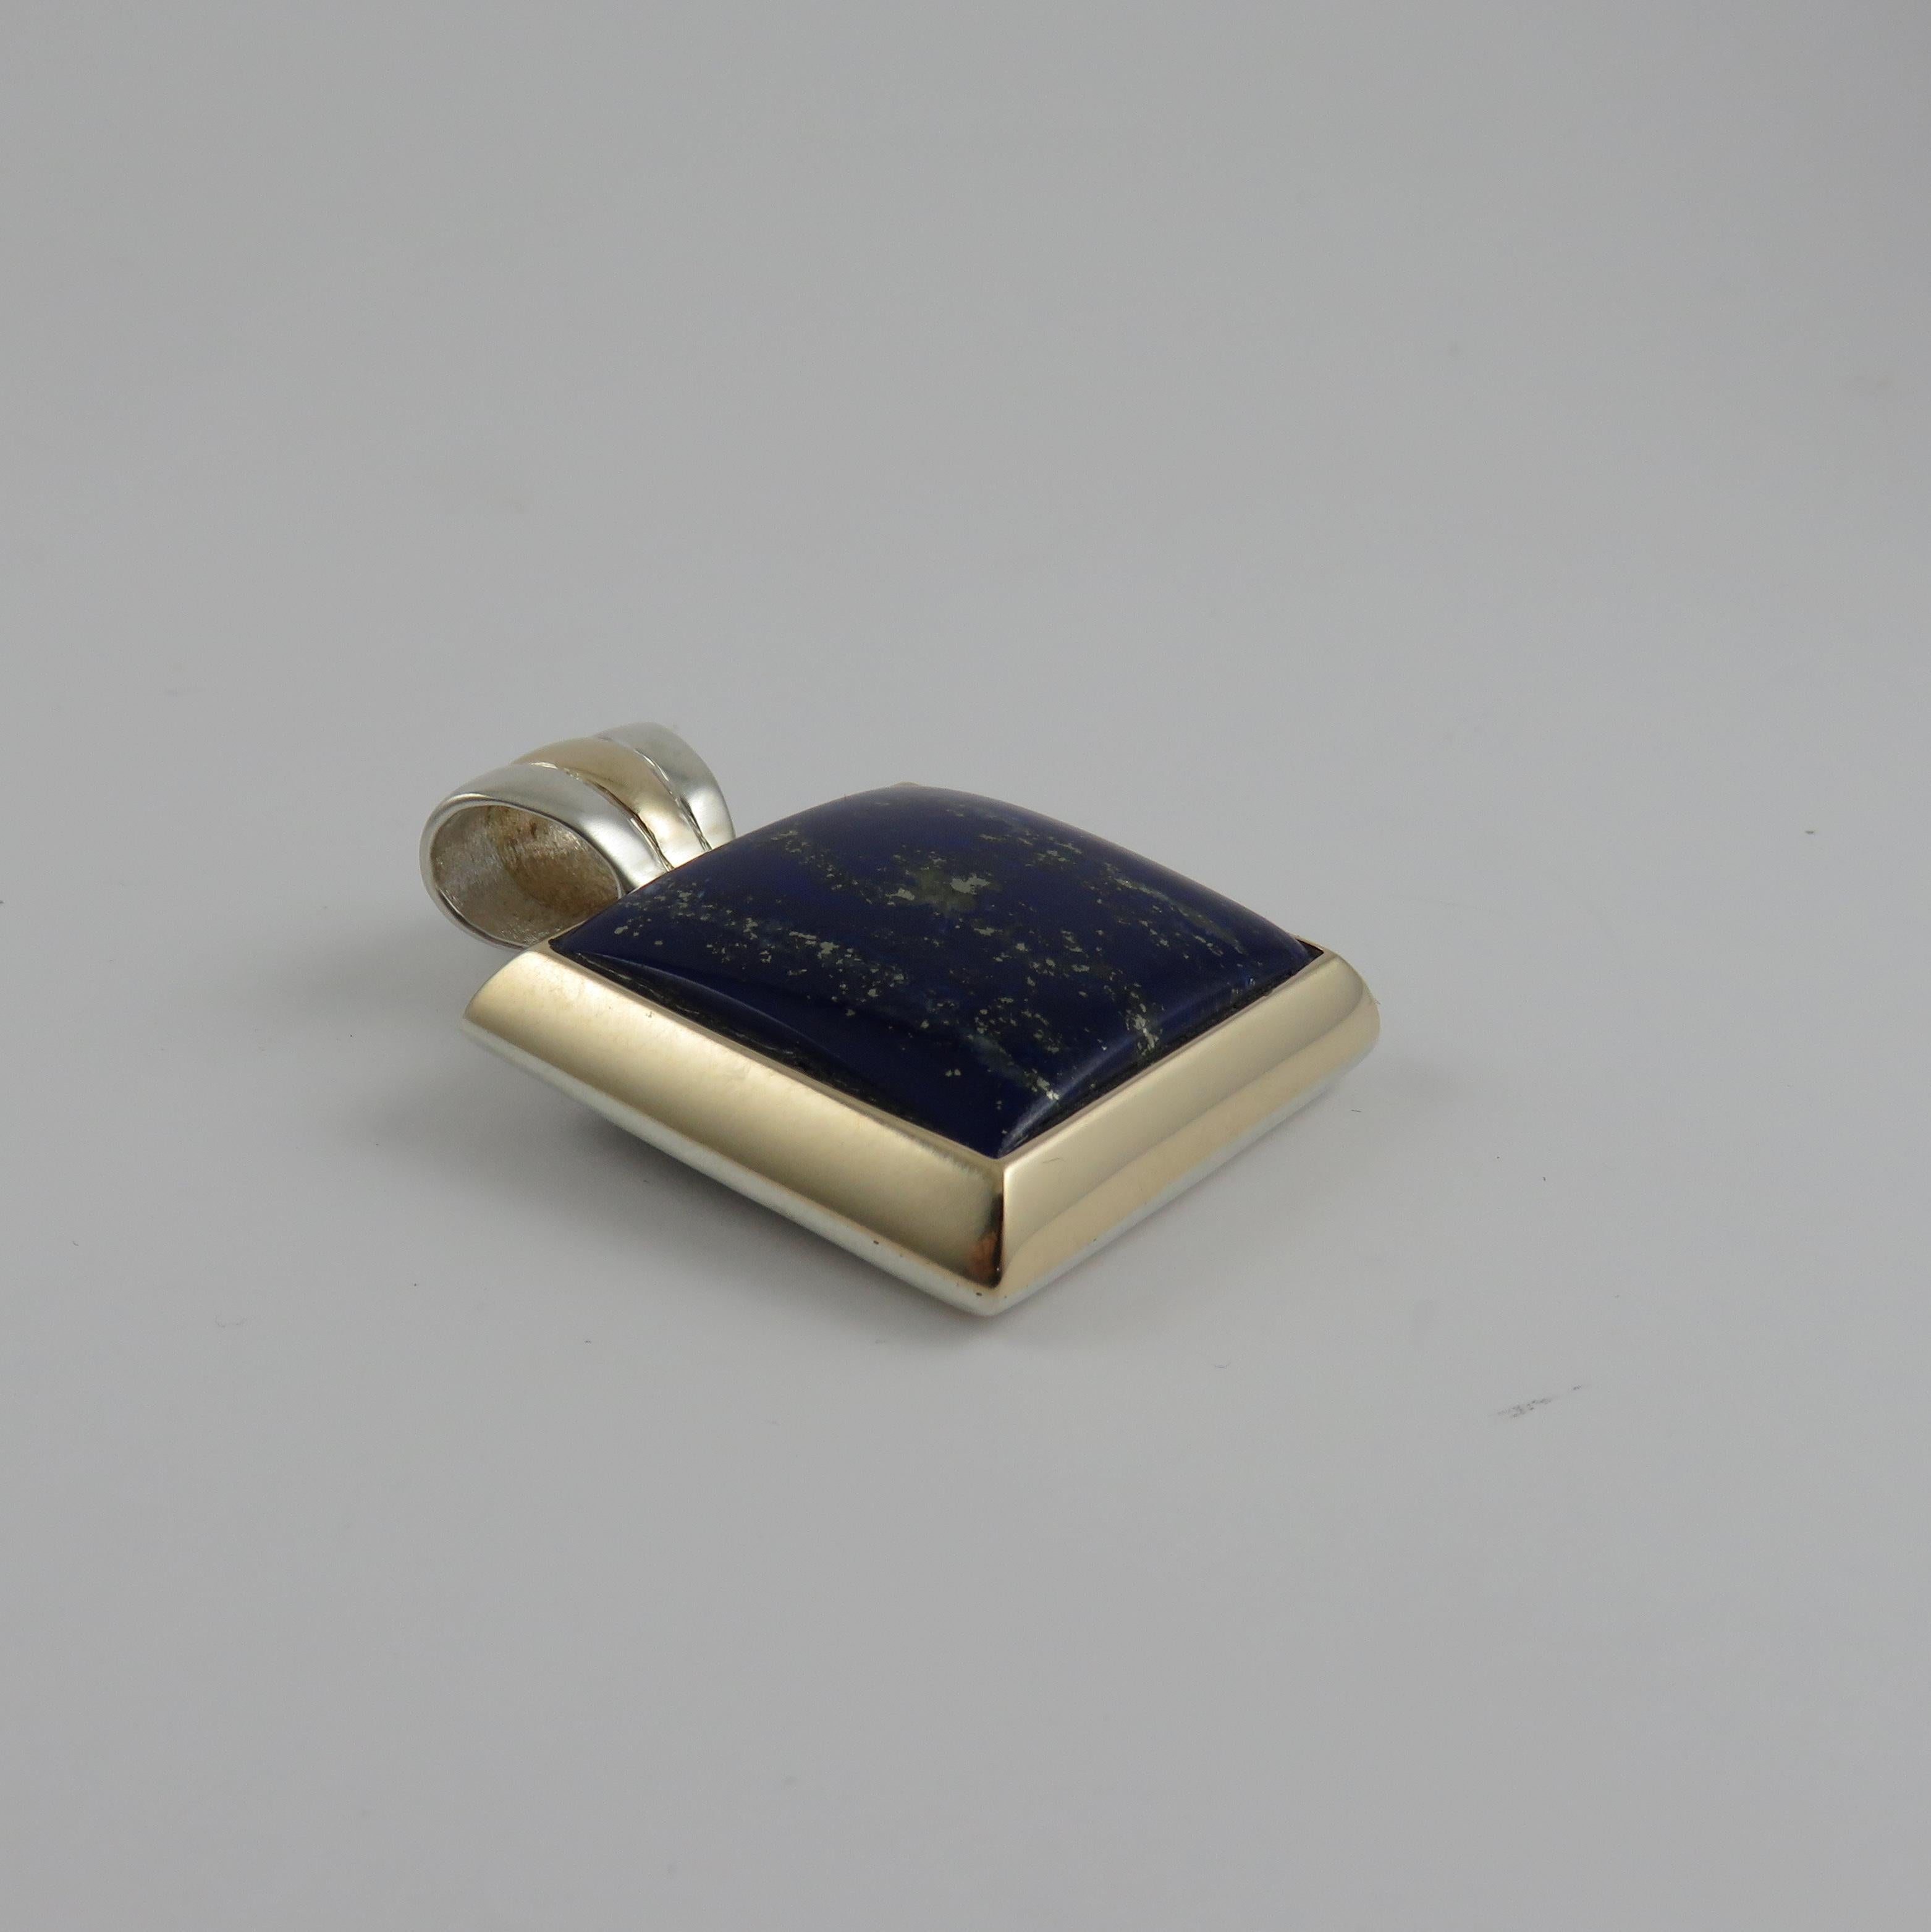 Cushion Cut Handmade Square Lapis Lazuli 9k Yellow Gold and Sterling Silver Pendant For Sale